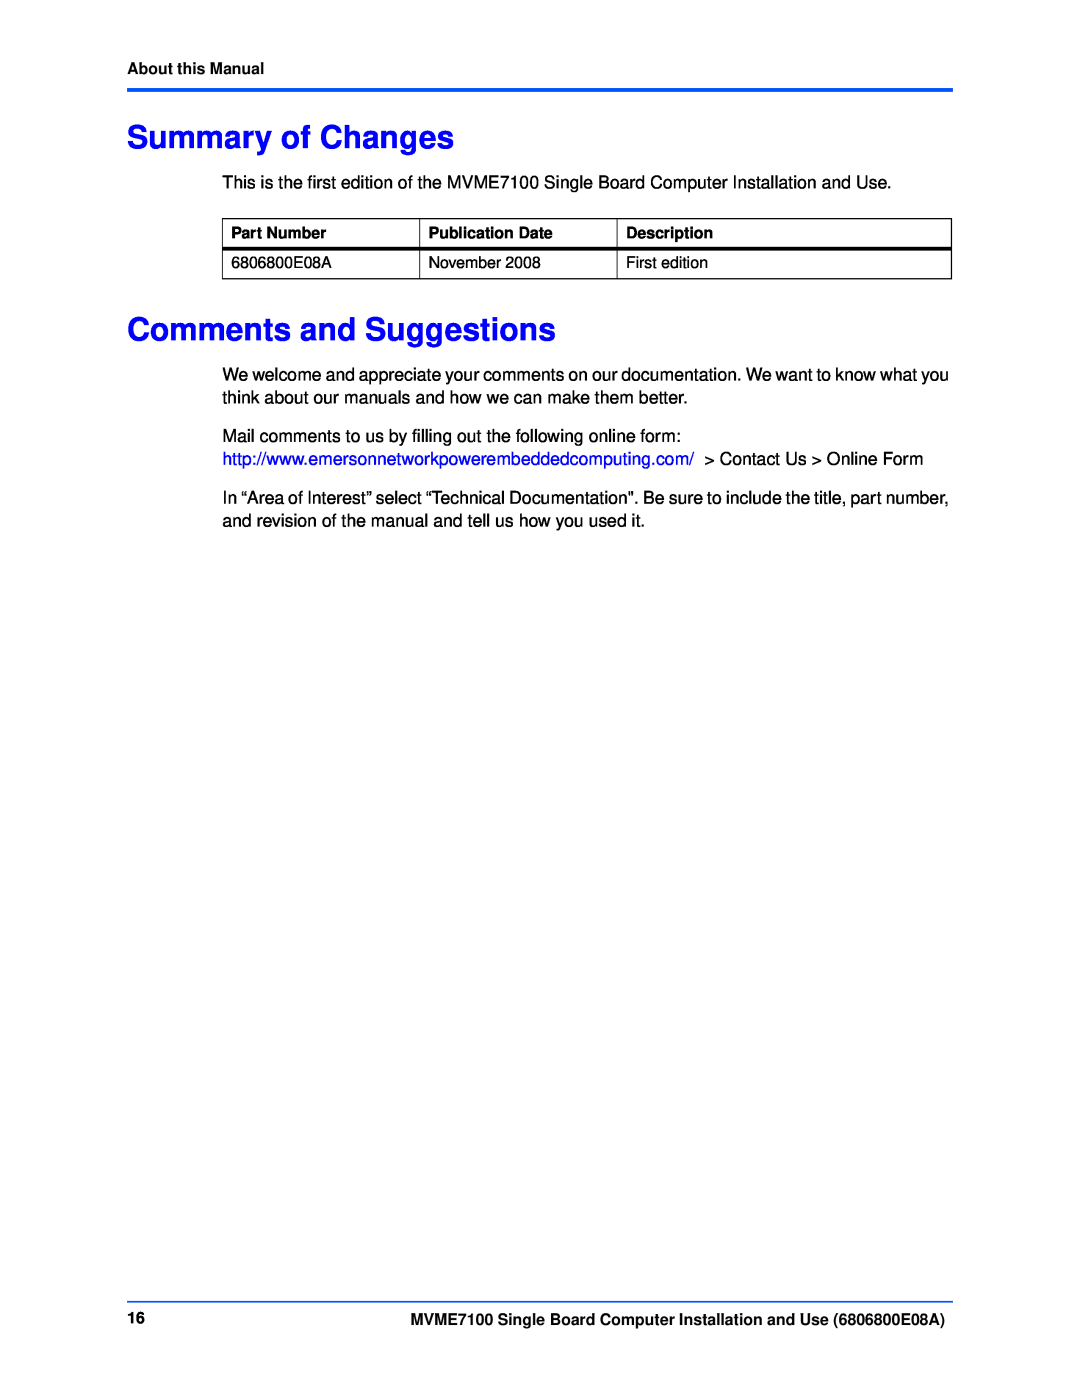 Emerson MVME7100 manual Summary of Changes, Comments and Suggestions 